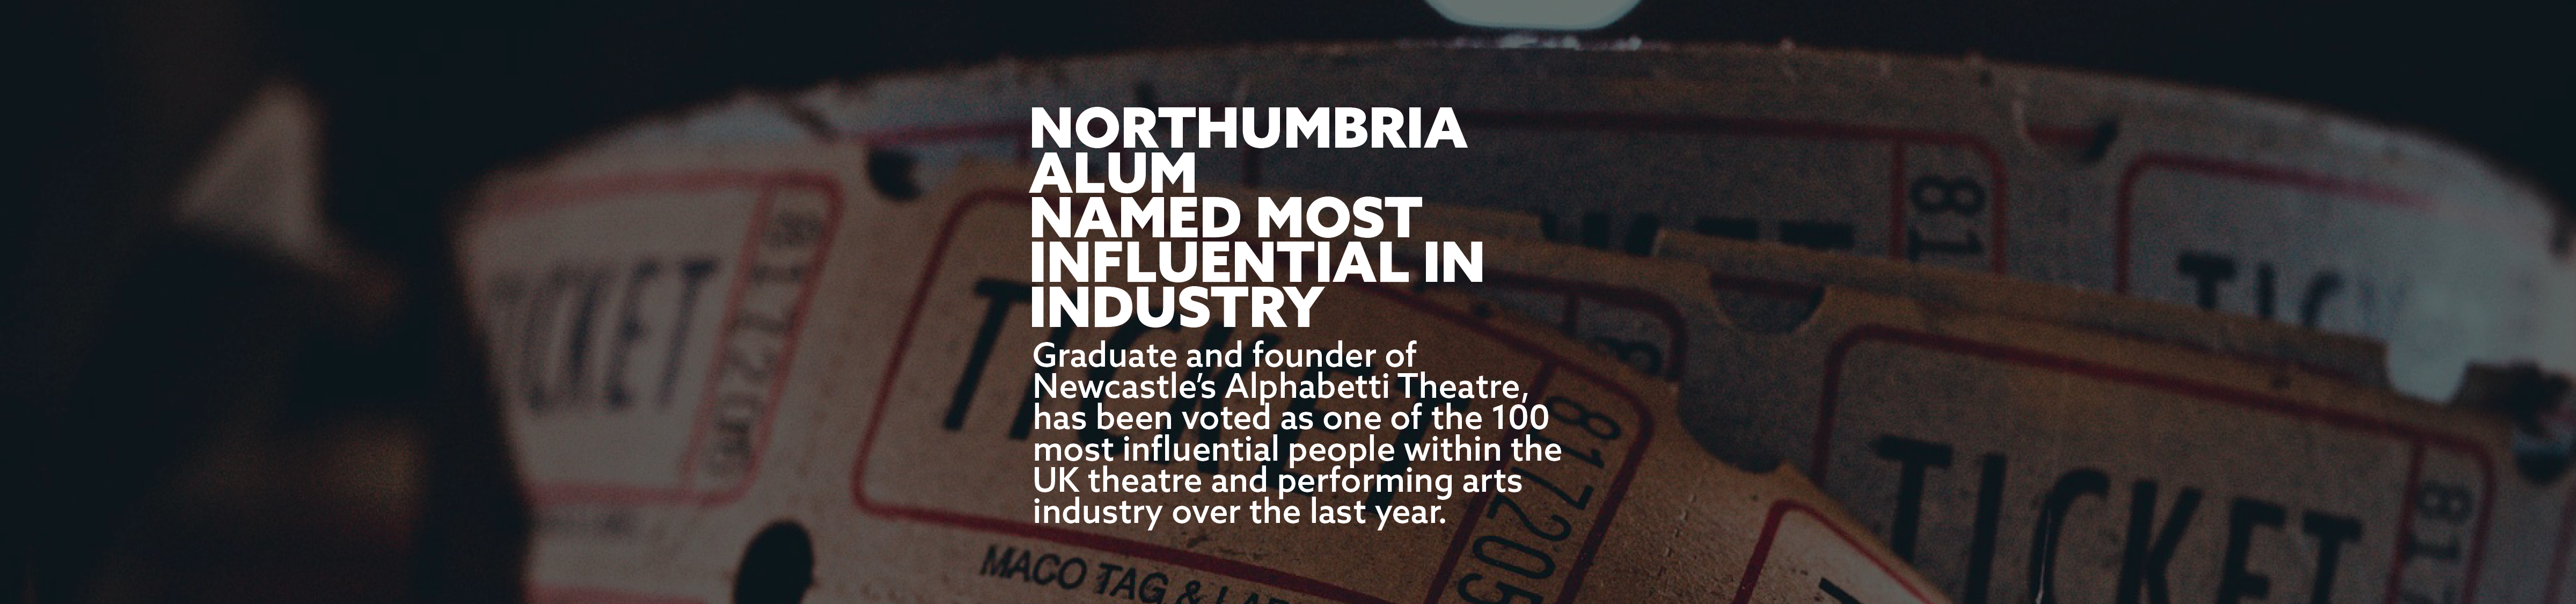 Northumbria Alum named most influential in industry